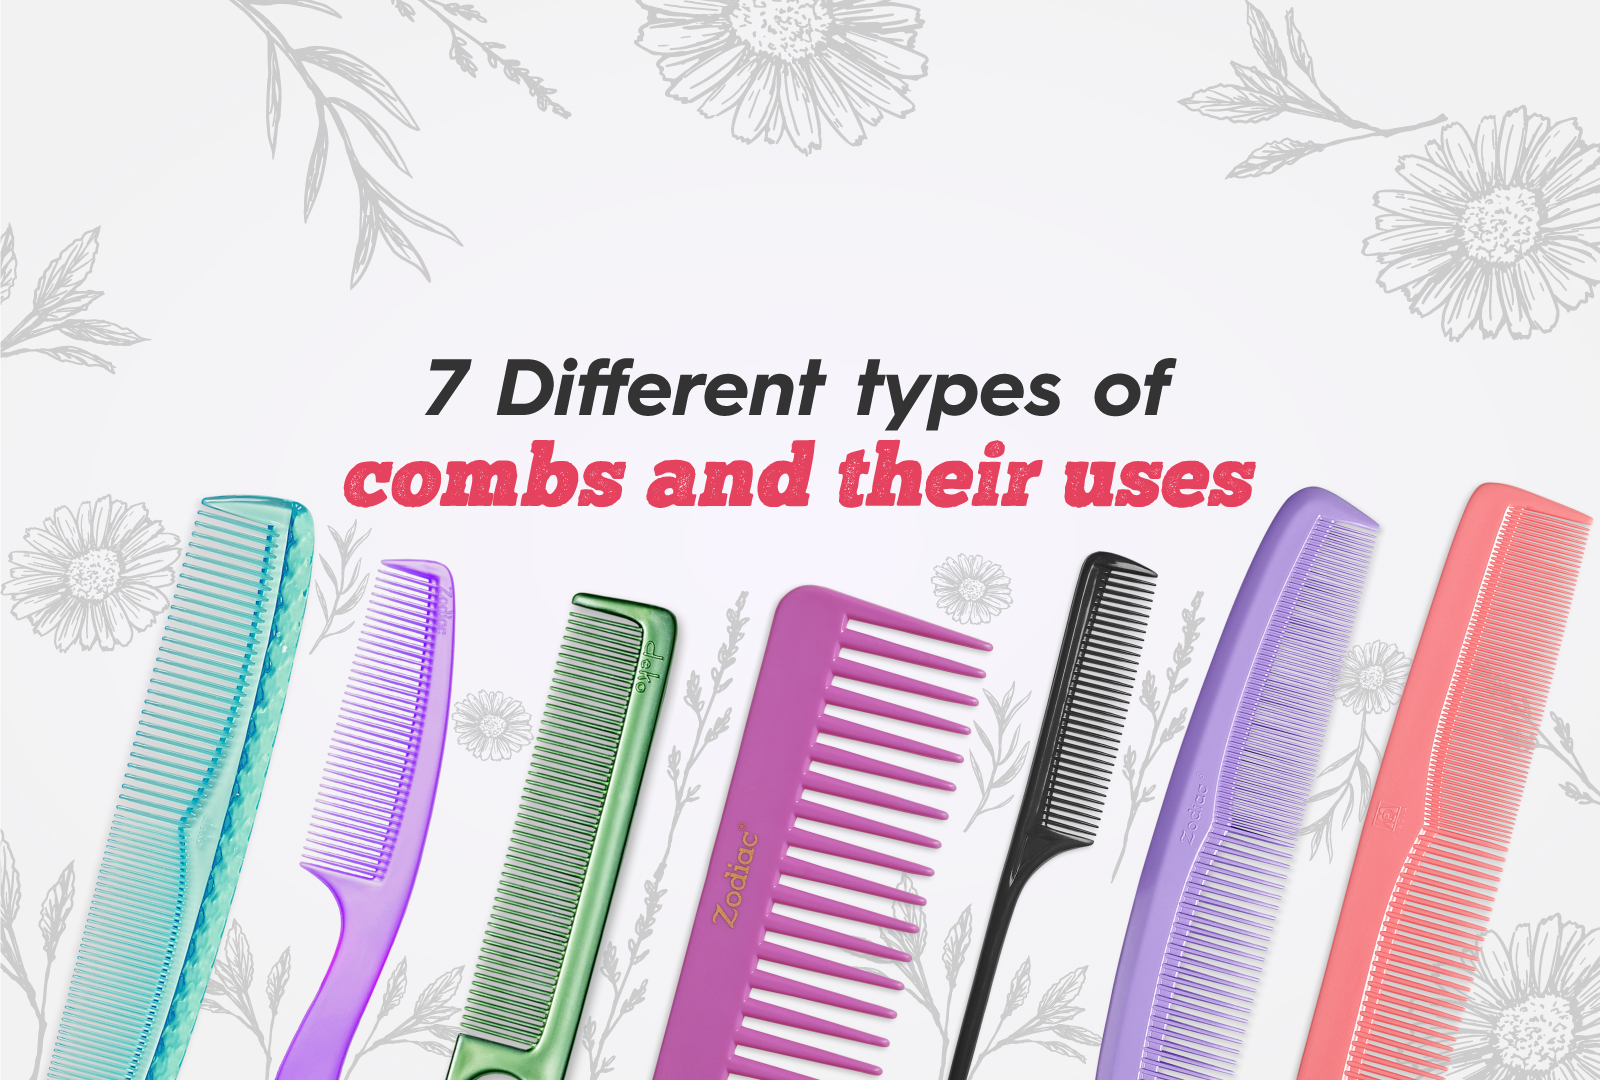 7 Different types of hair combs and their uses